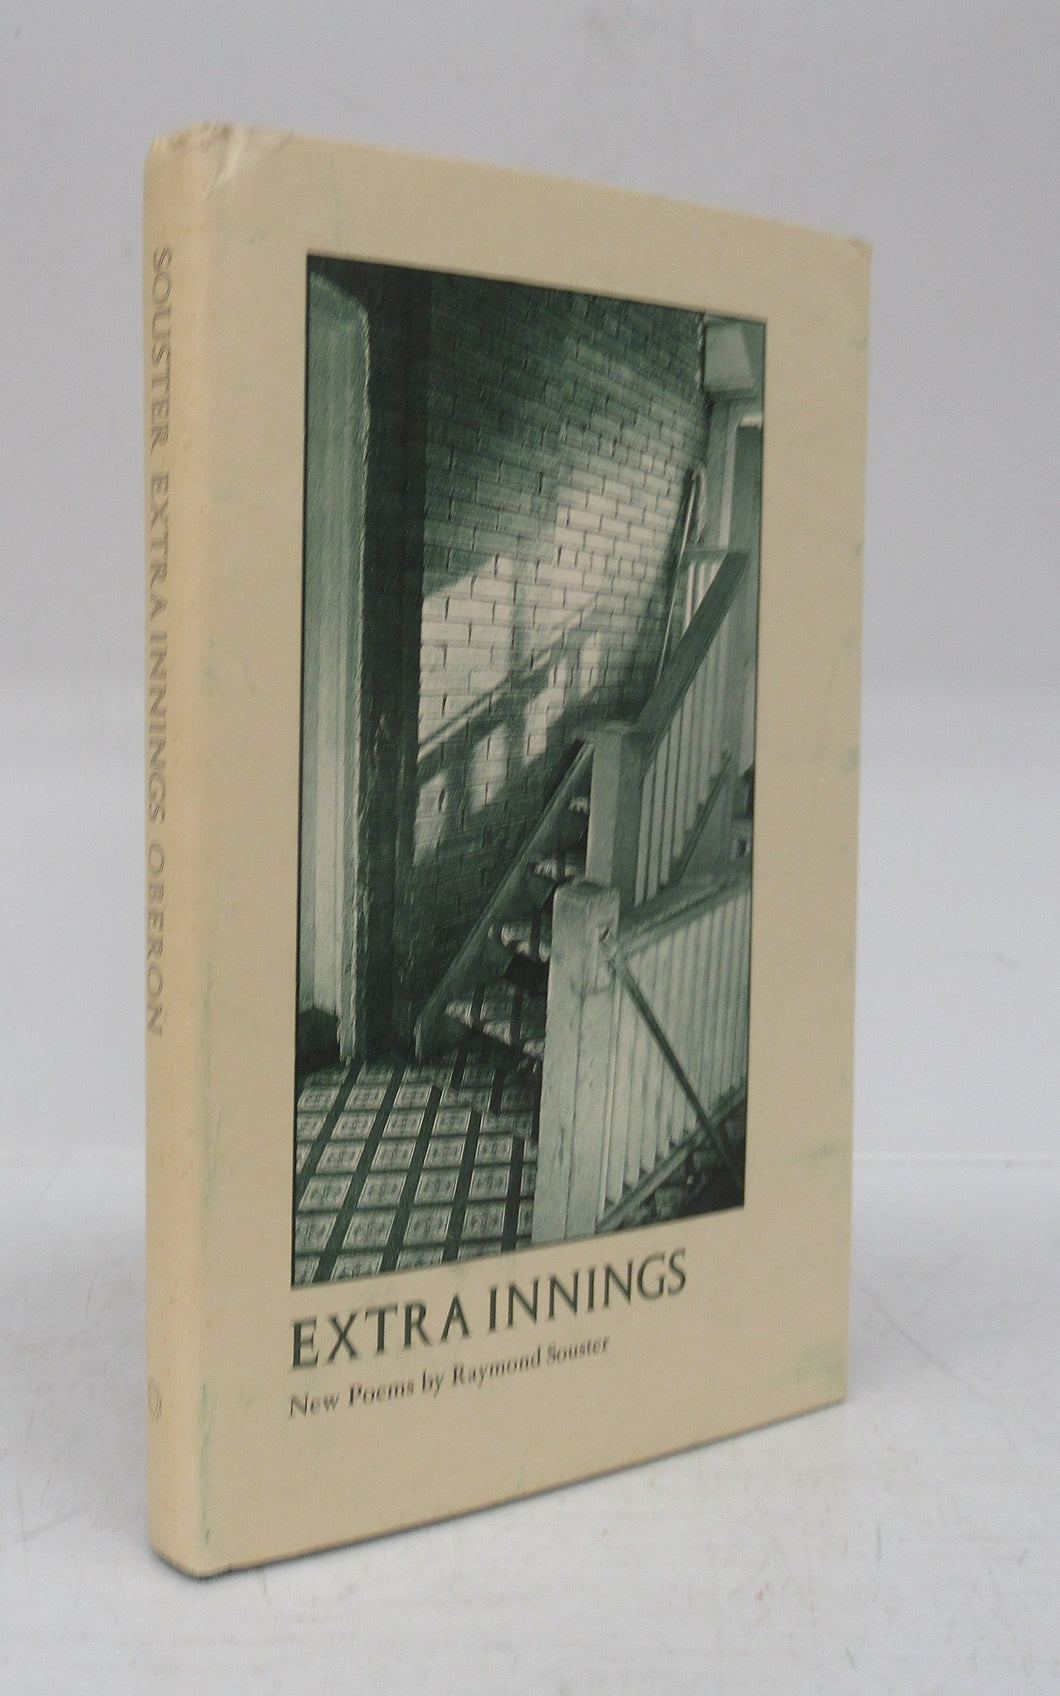 Extra Innings: New Poems